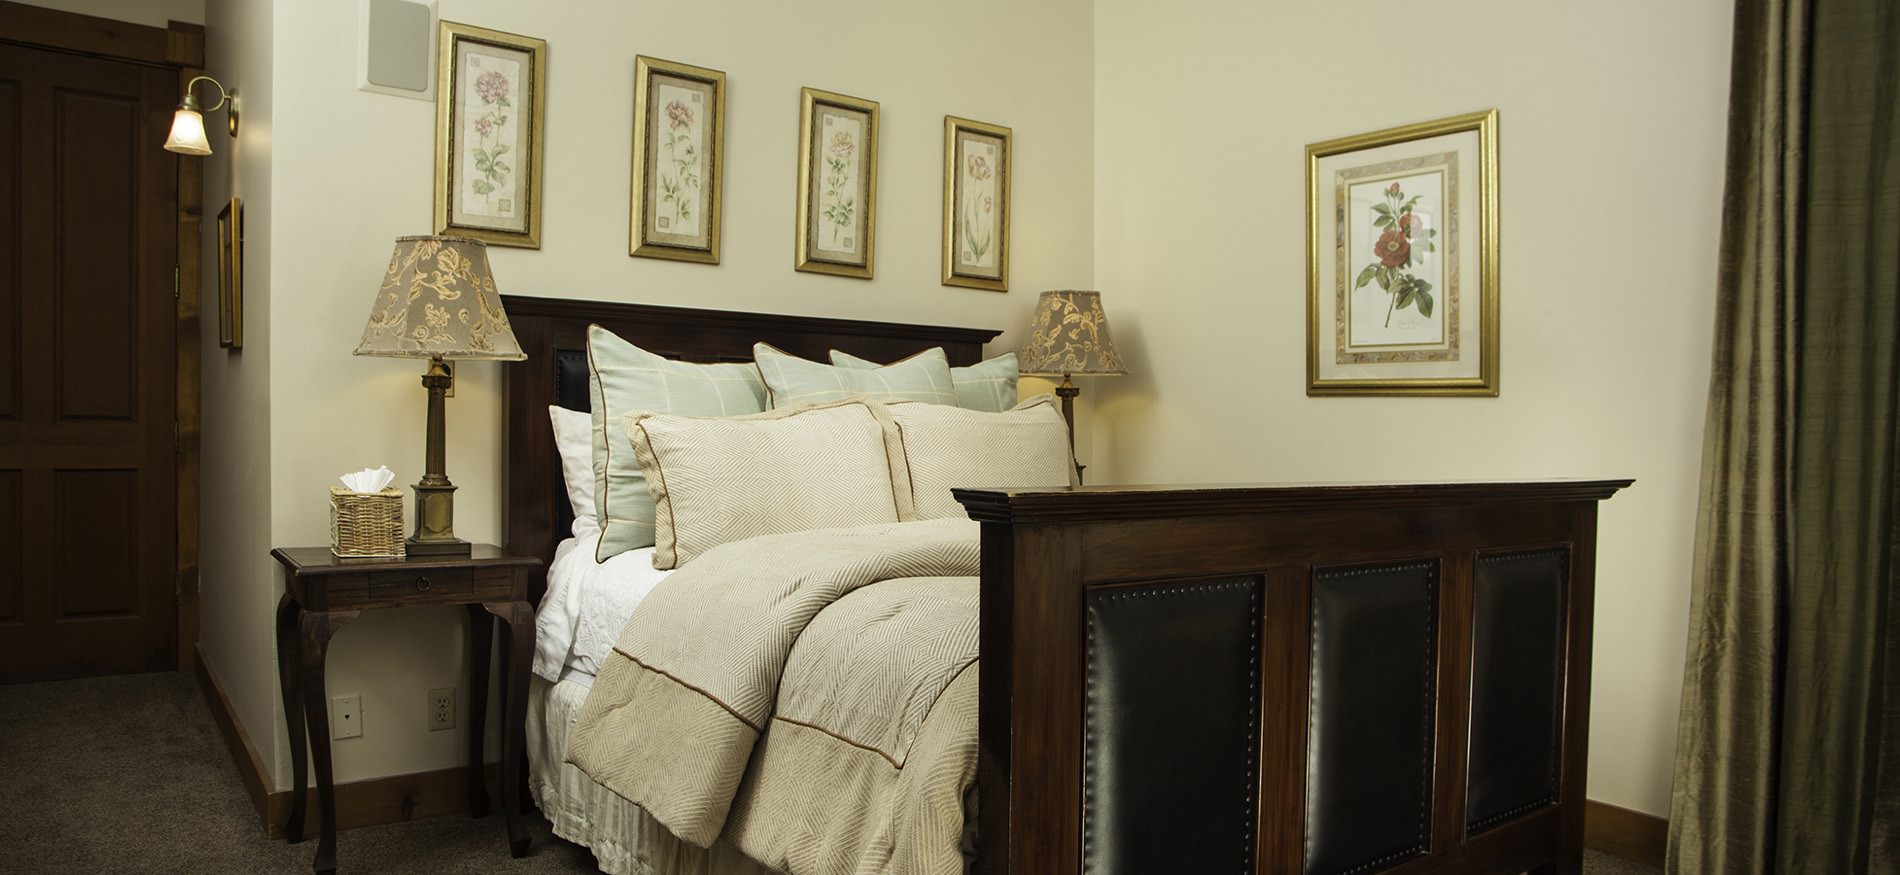 Dark wood and leather bed with ivory comforter, light green and ivory pillows, gold-framed pictures, and nightstands with lamps